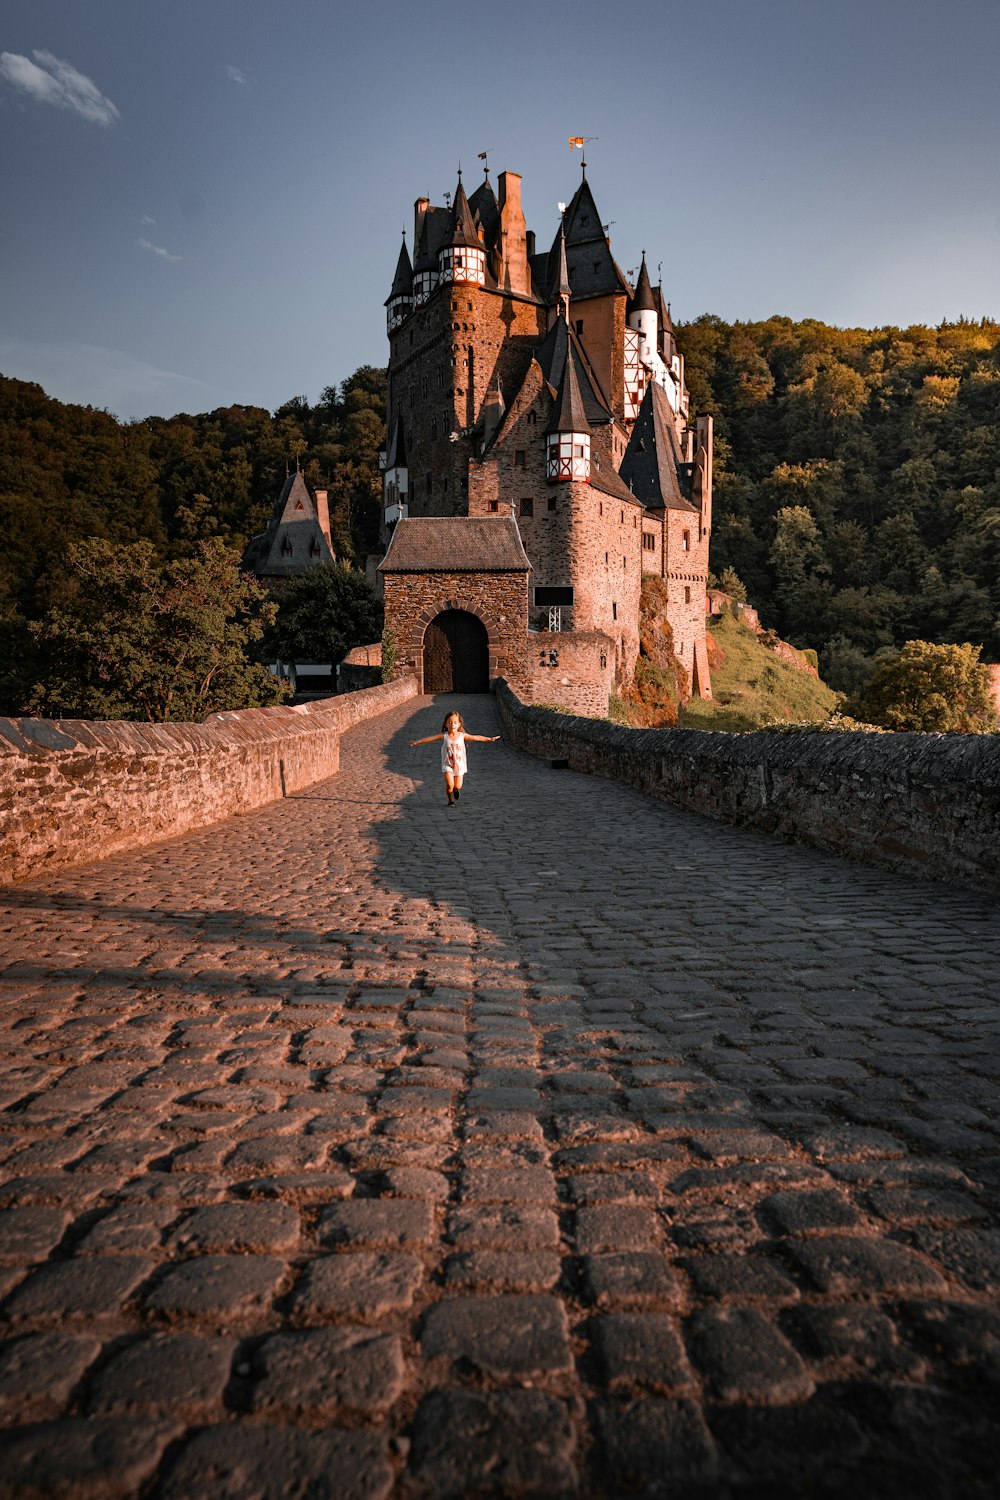 a person walking down a cobblestone road in front of a castle